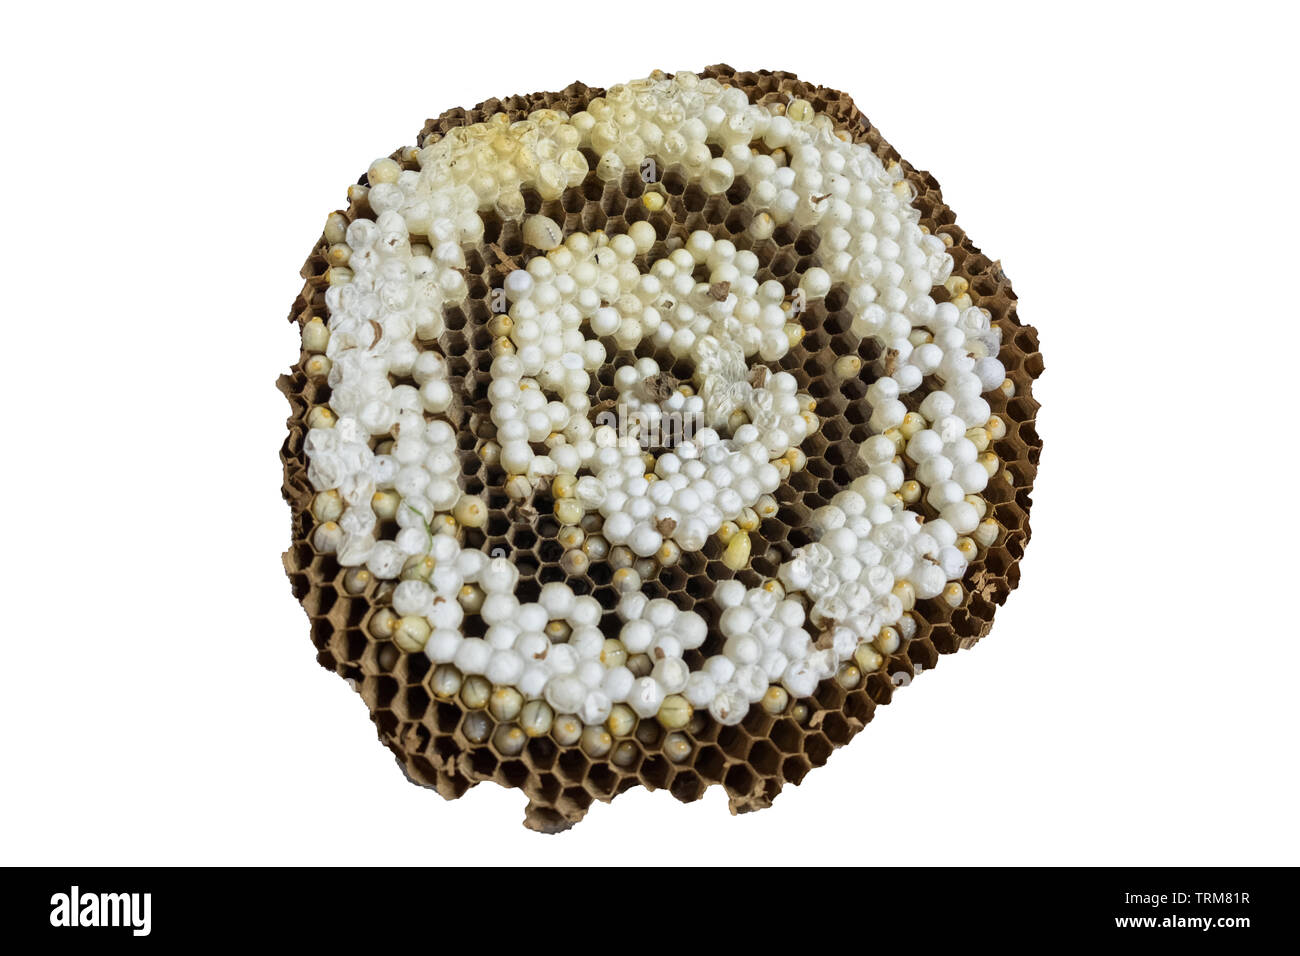 Brown wasps nest with larvae and eggs, isolated on white background Stock Photo